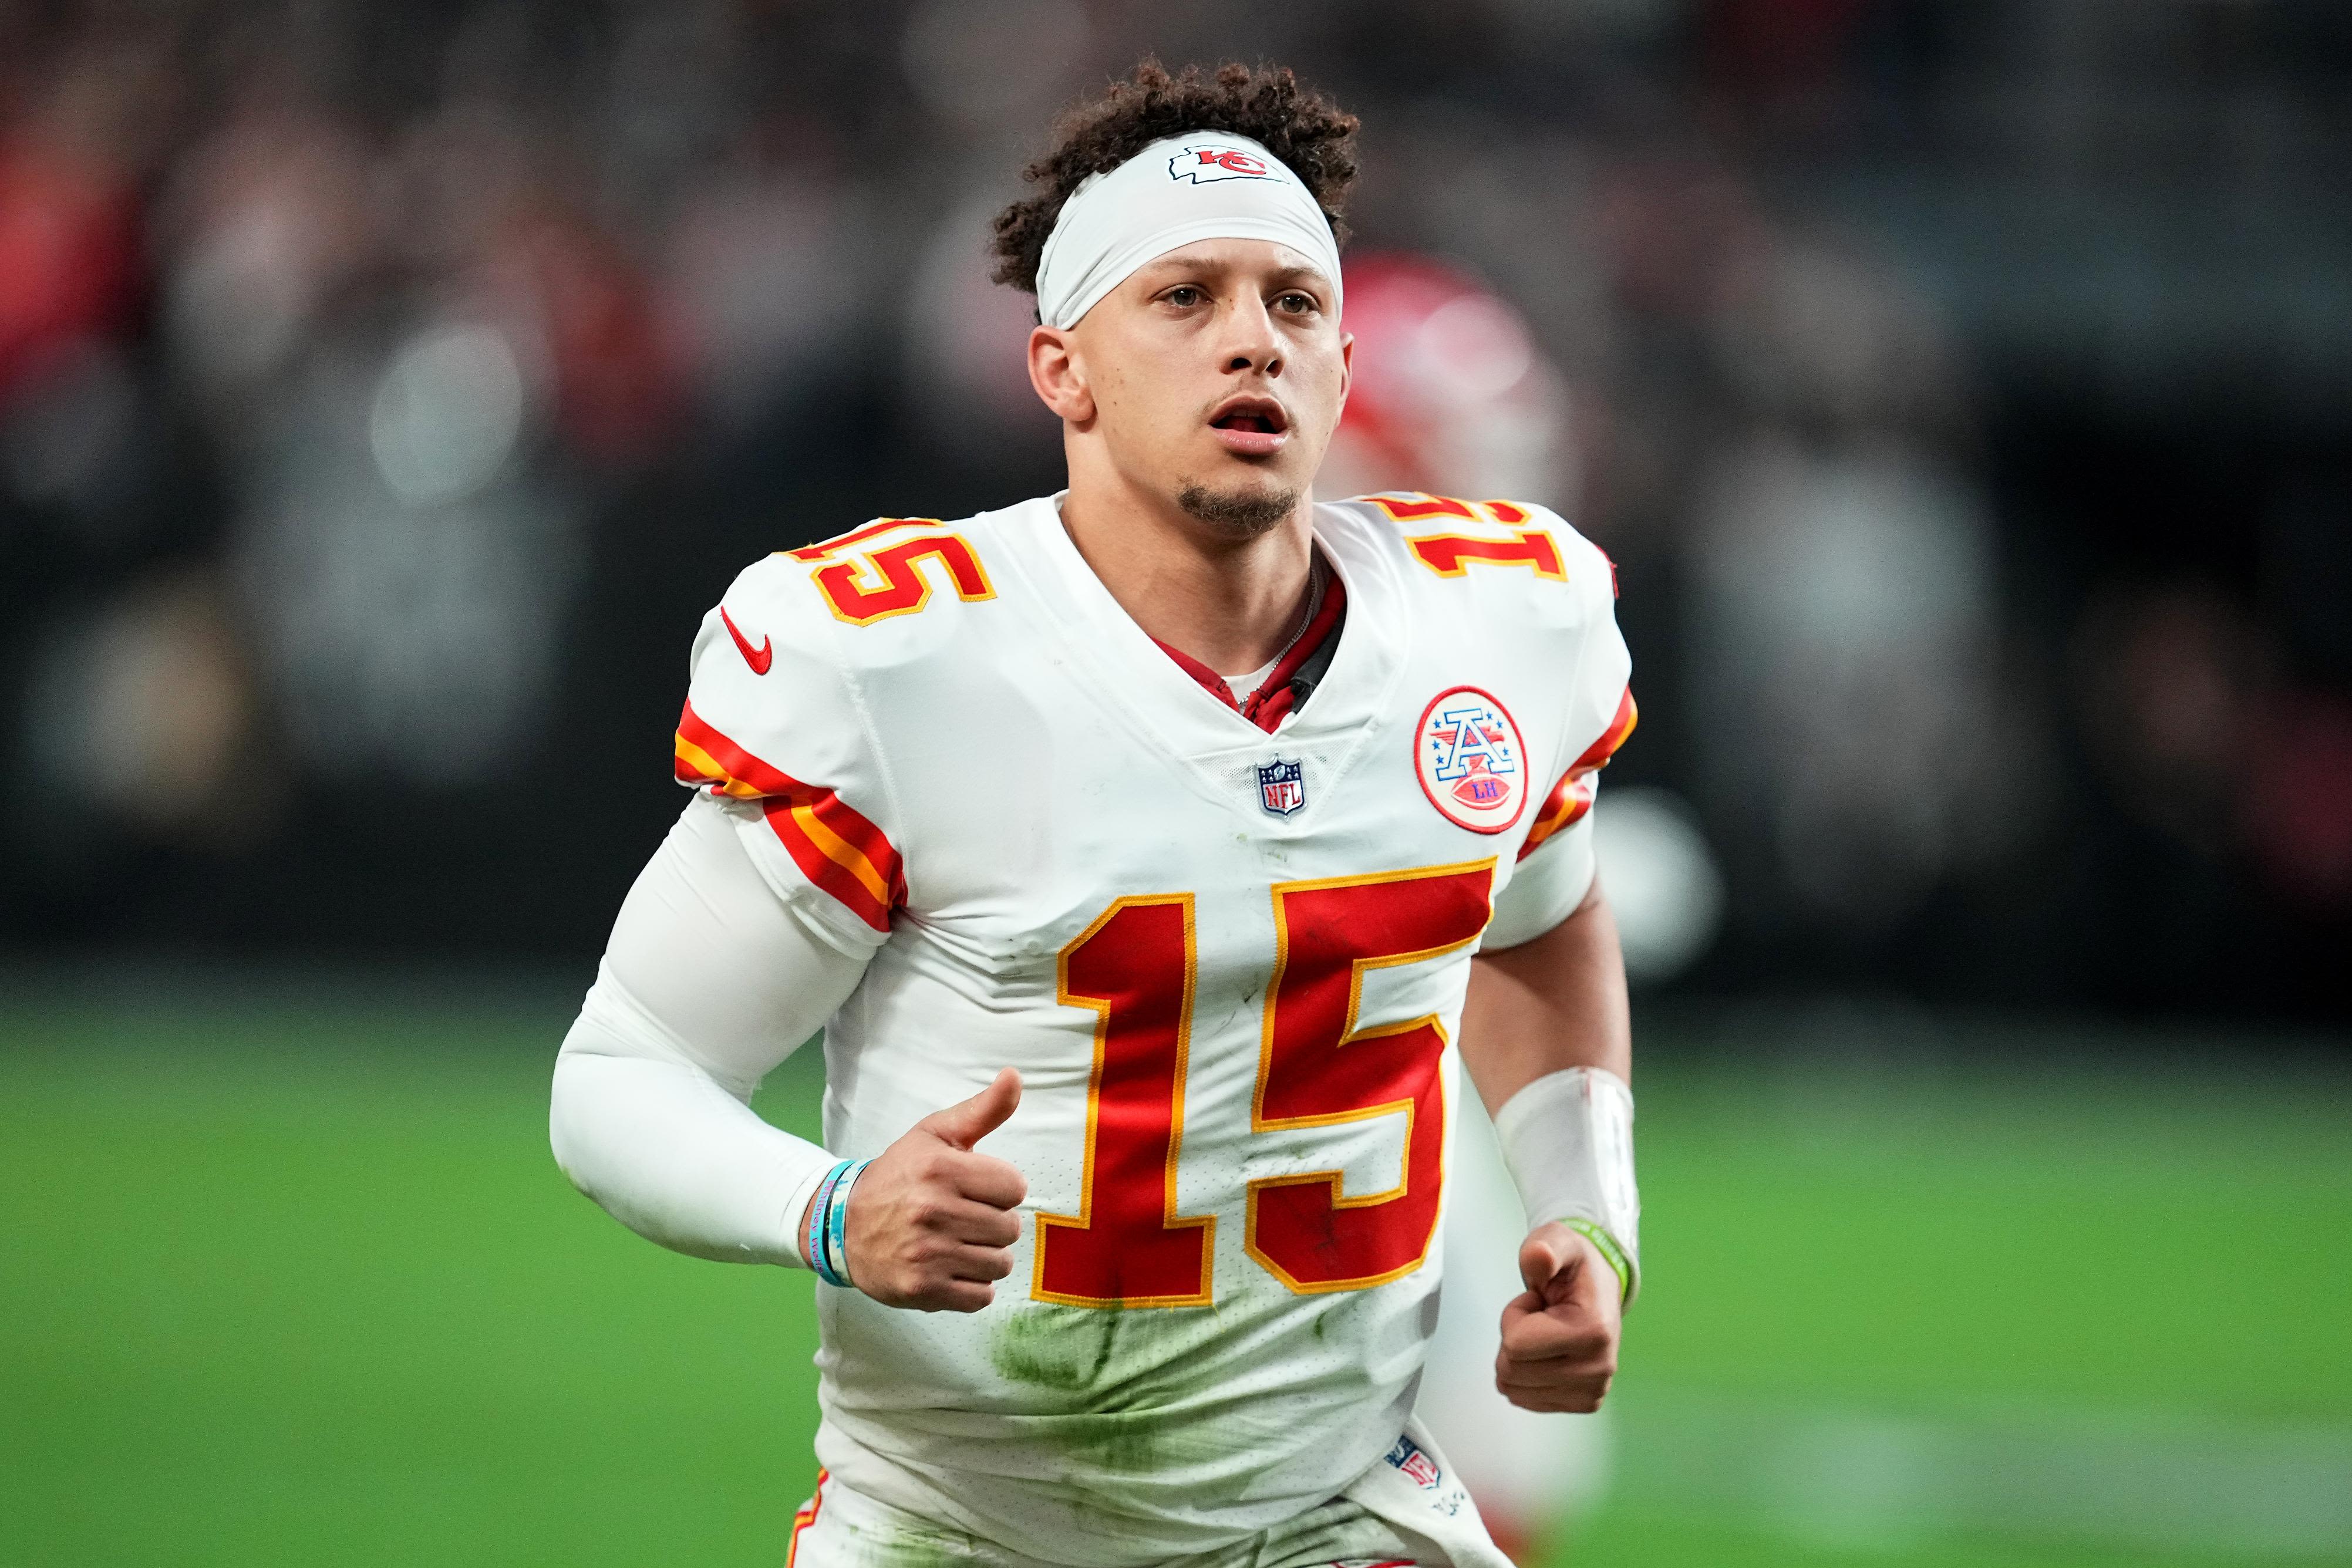 NFL star Patrick Mahomes joins NWSL team Kansas City Current's ownership group | CNN